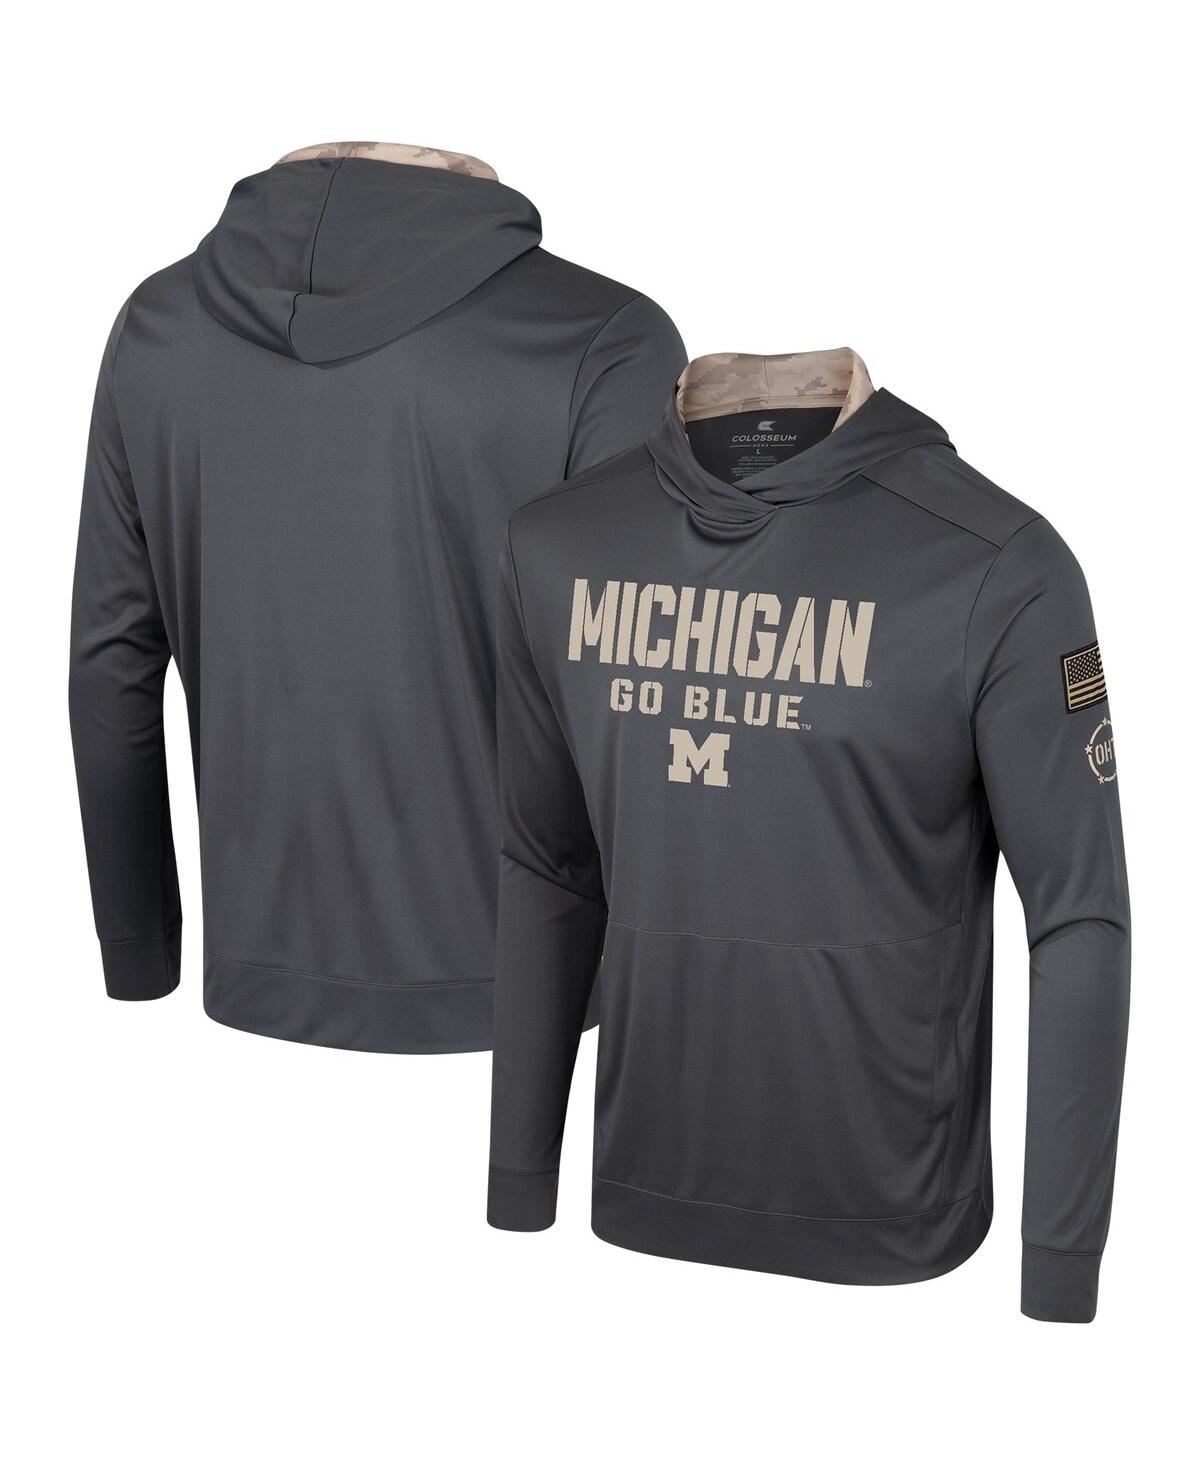 Men's Colosseum Charcoal Michigan Wolverines Oht Military-Inspired Appreciation Long Sleeve Hoodie T-shirt - Charcoal